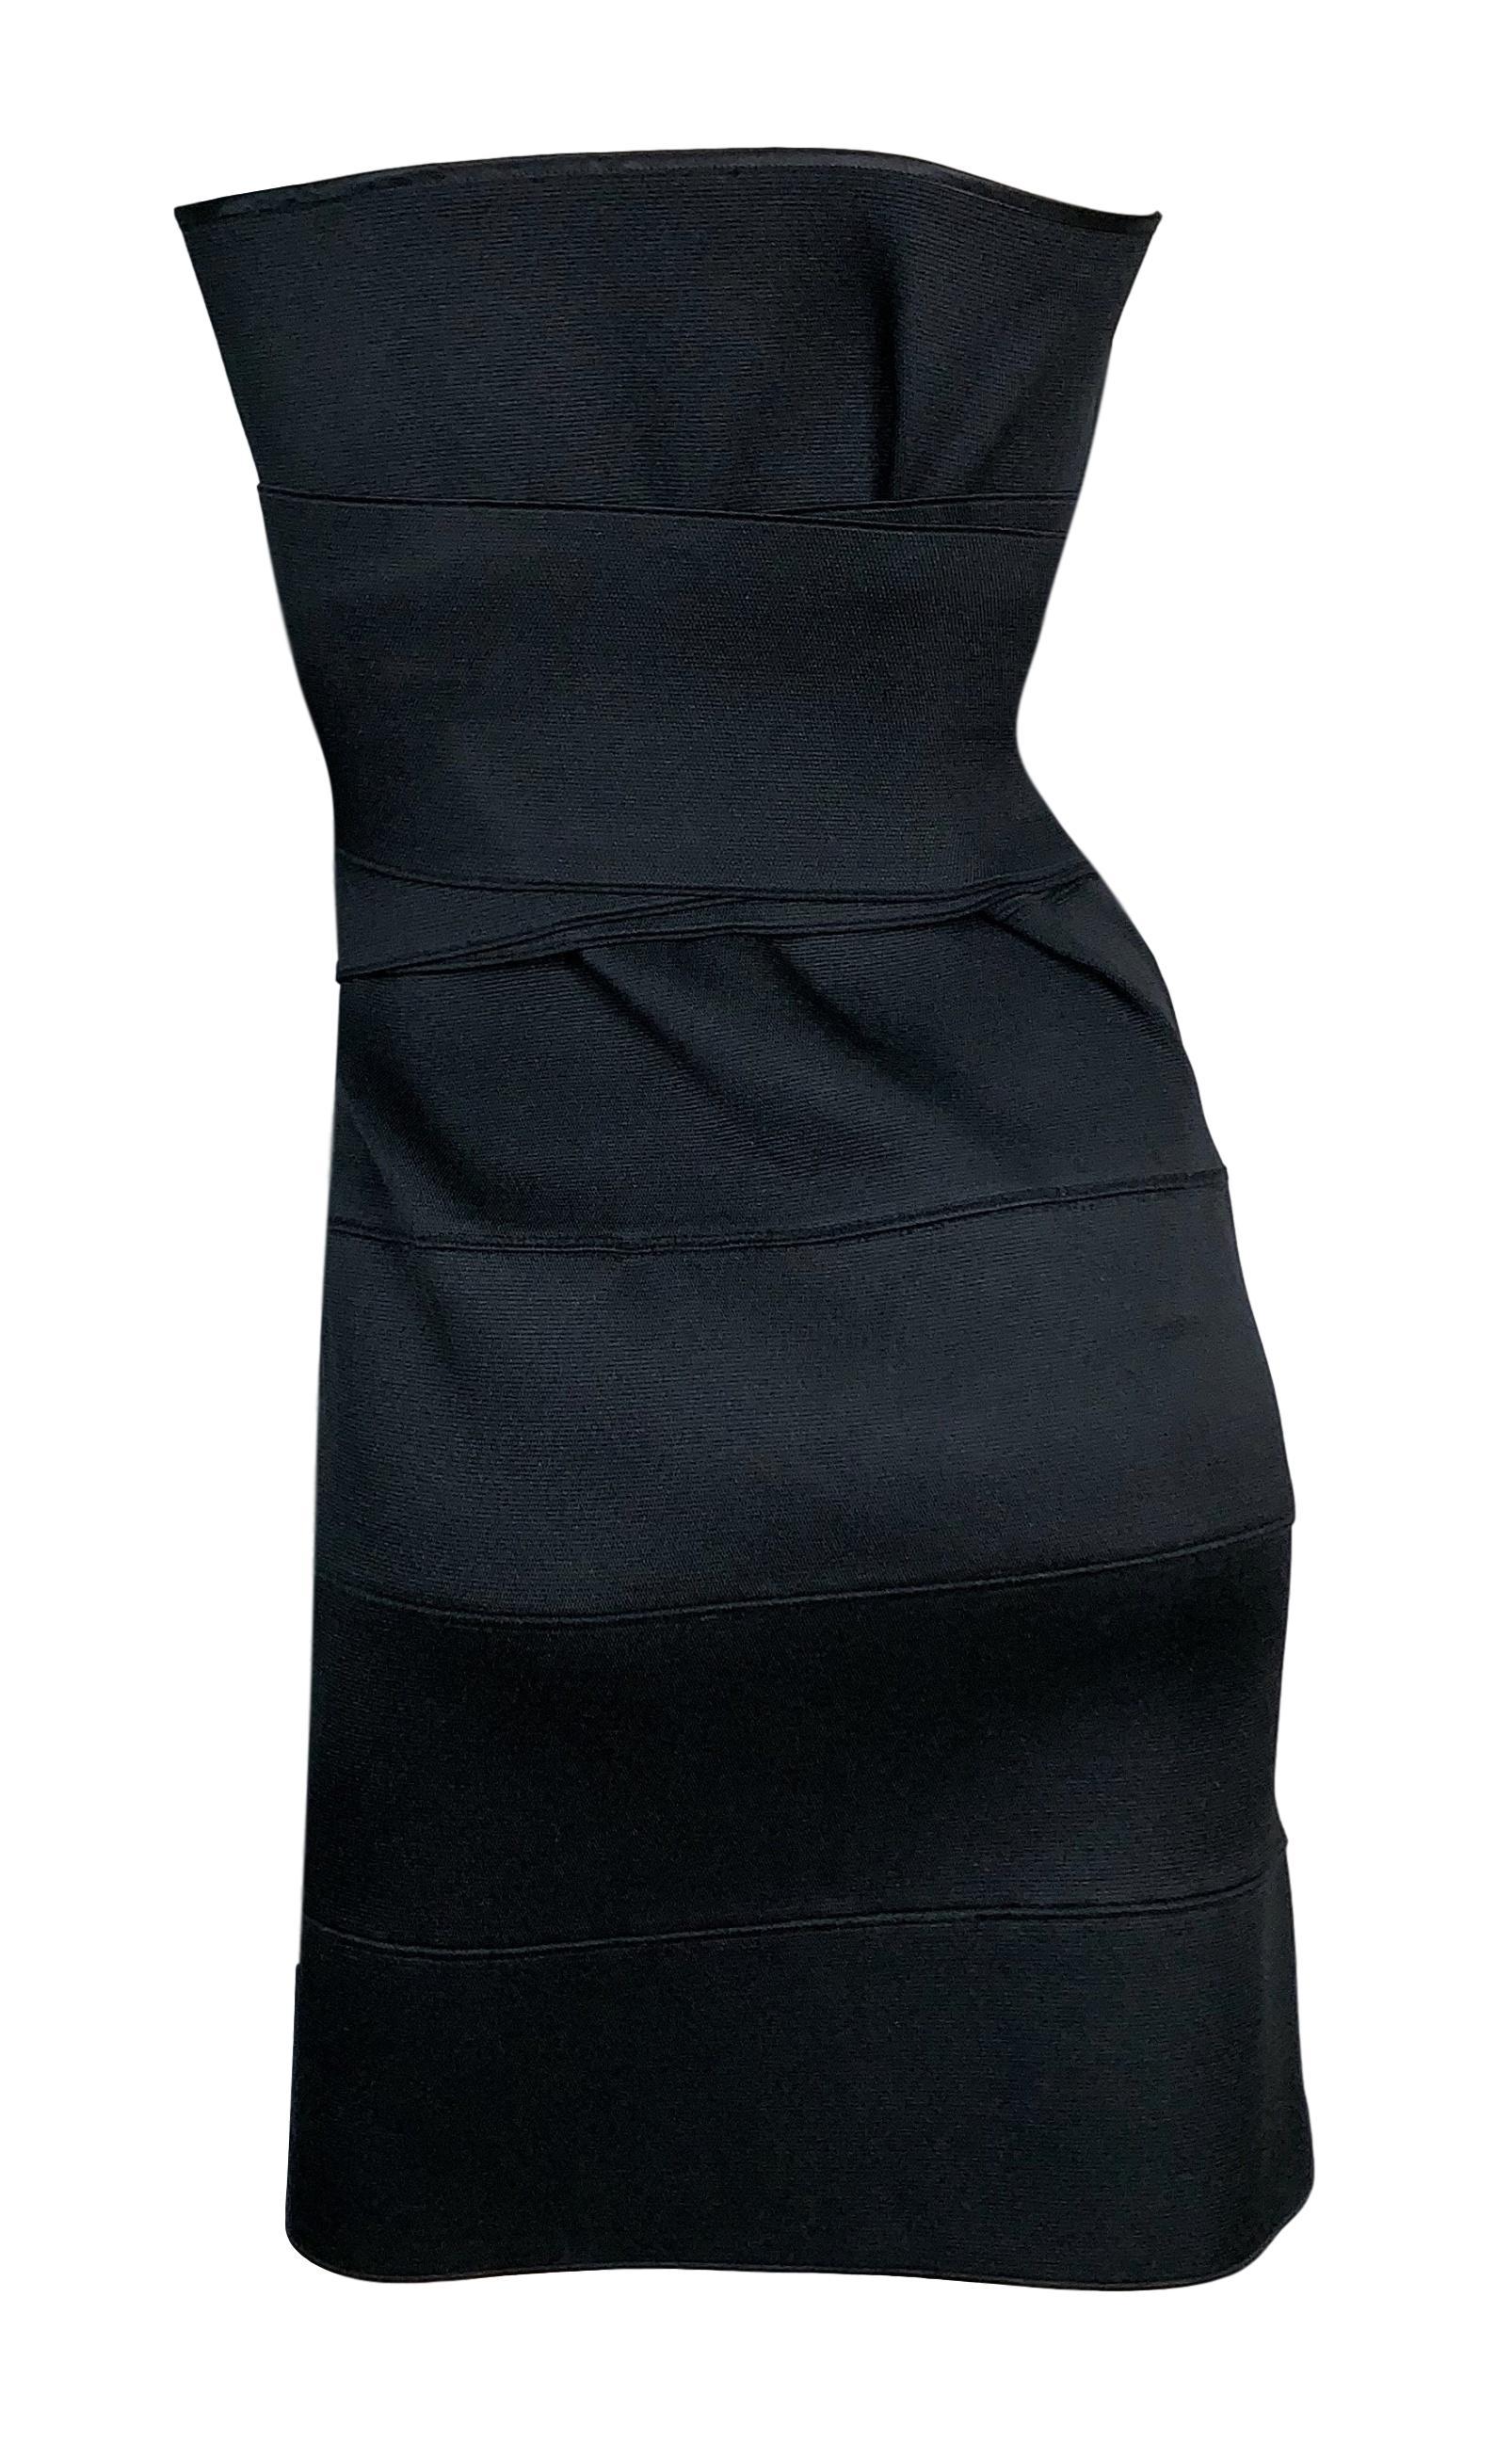 S/S 2001 Yves Saint Laurent Tom Ford Runway Black Bandage Wrap Mini Dress In Excellent Condition In Yukon, OK